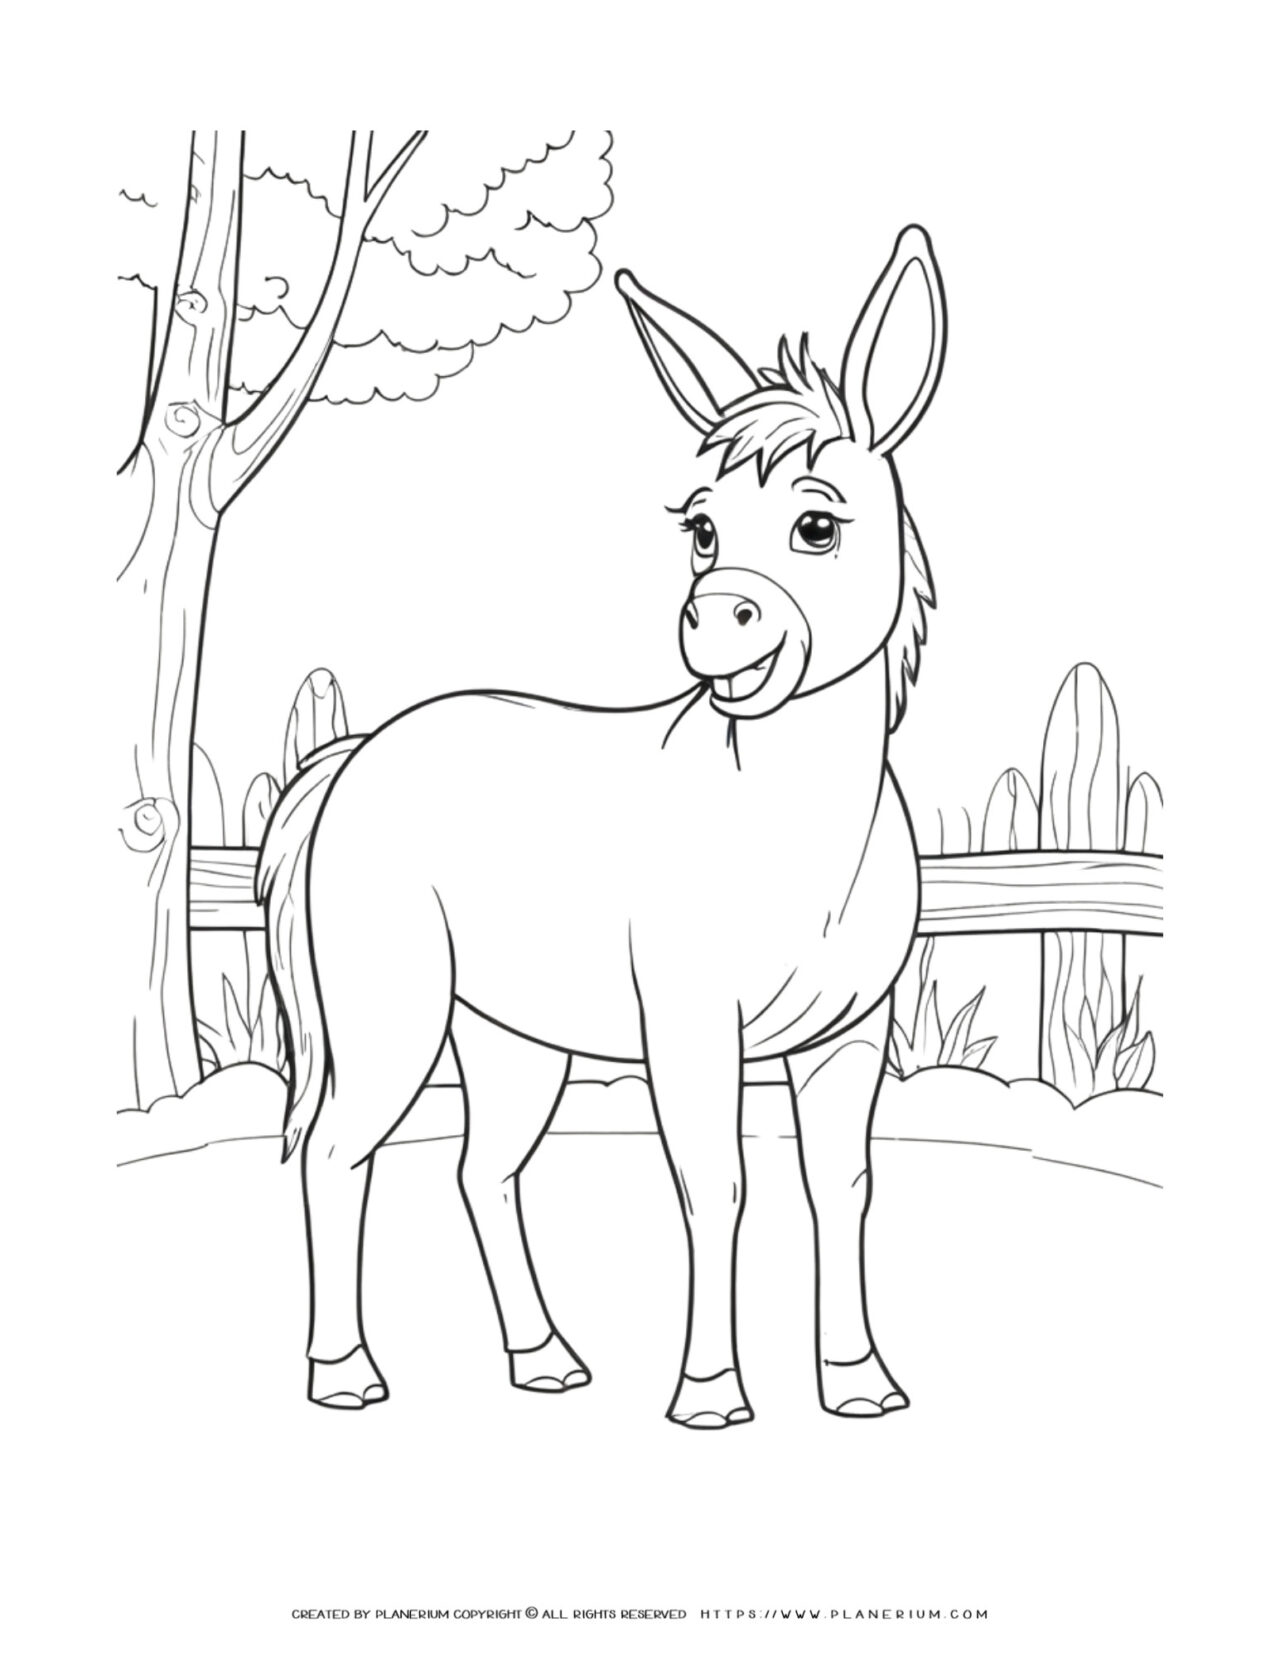 Donkey-Standing-Simple-Farm-Coloring-Page